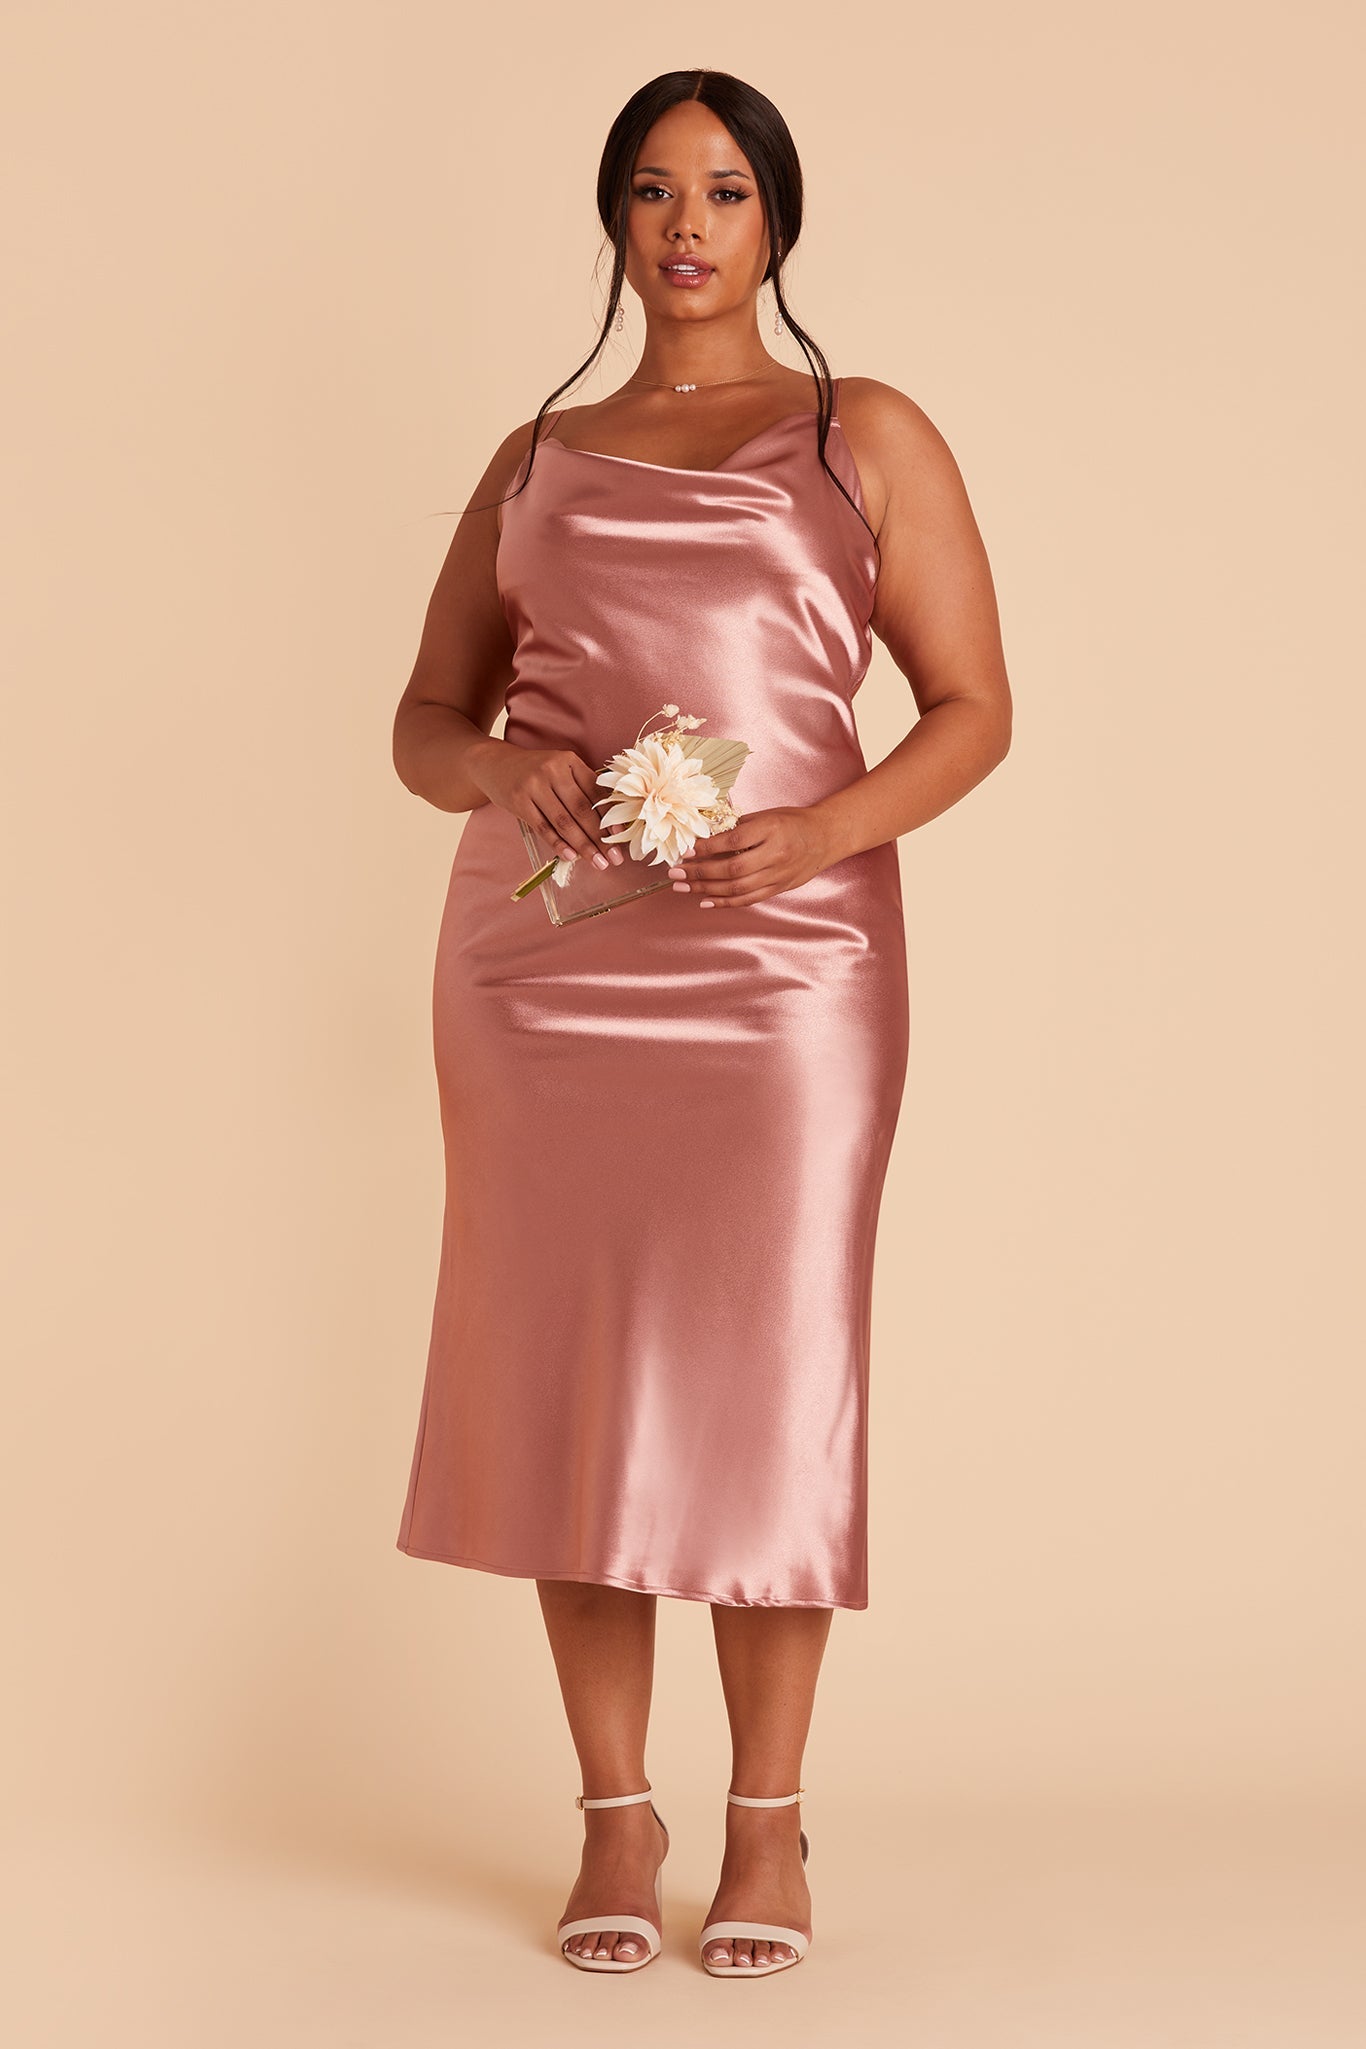 Lisa midi plus size bridesmaid dress in desert rose satin by Birdy Grey, front view